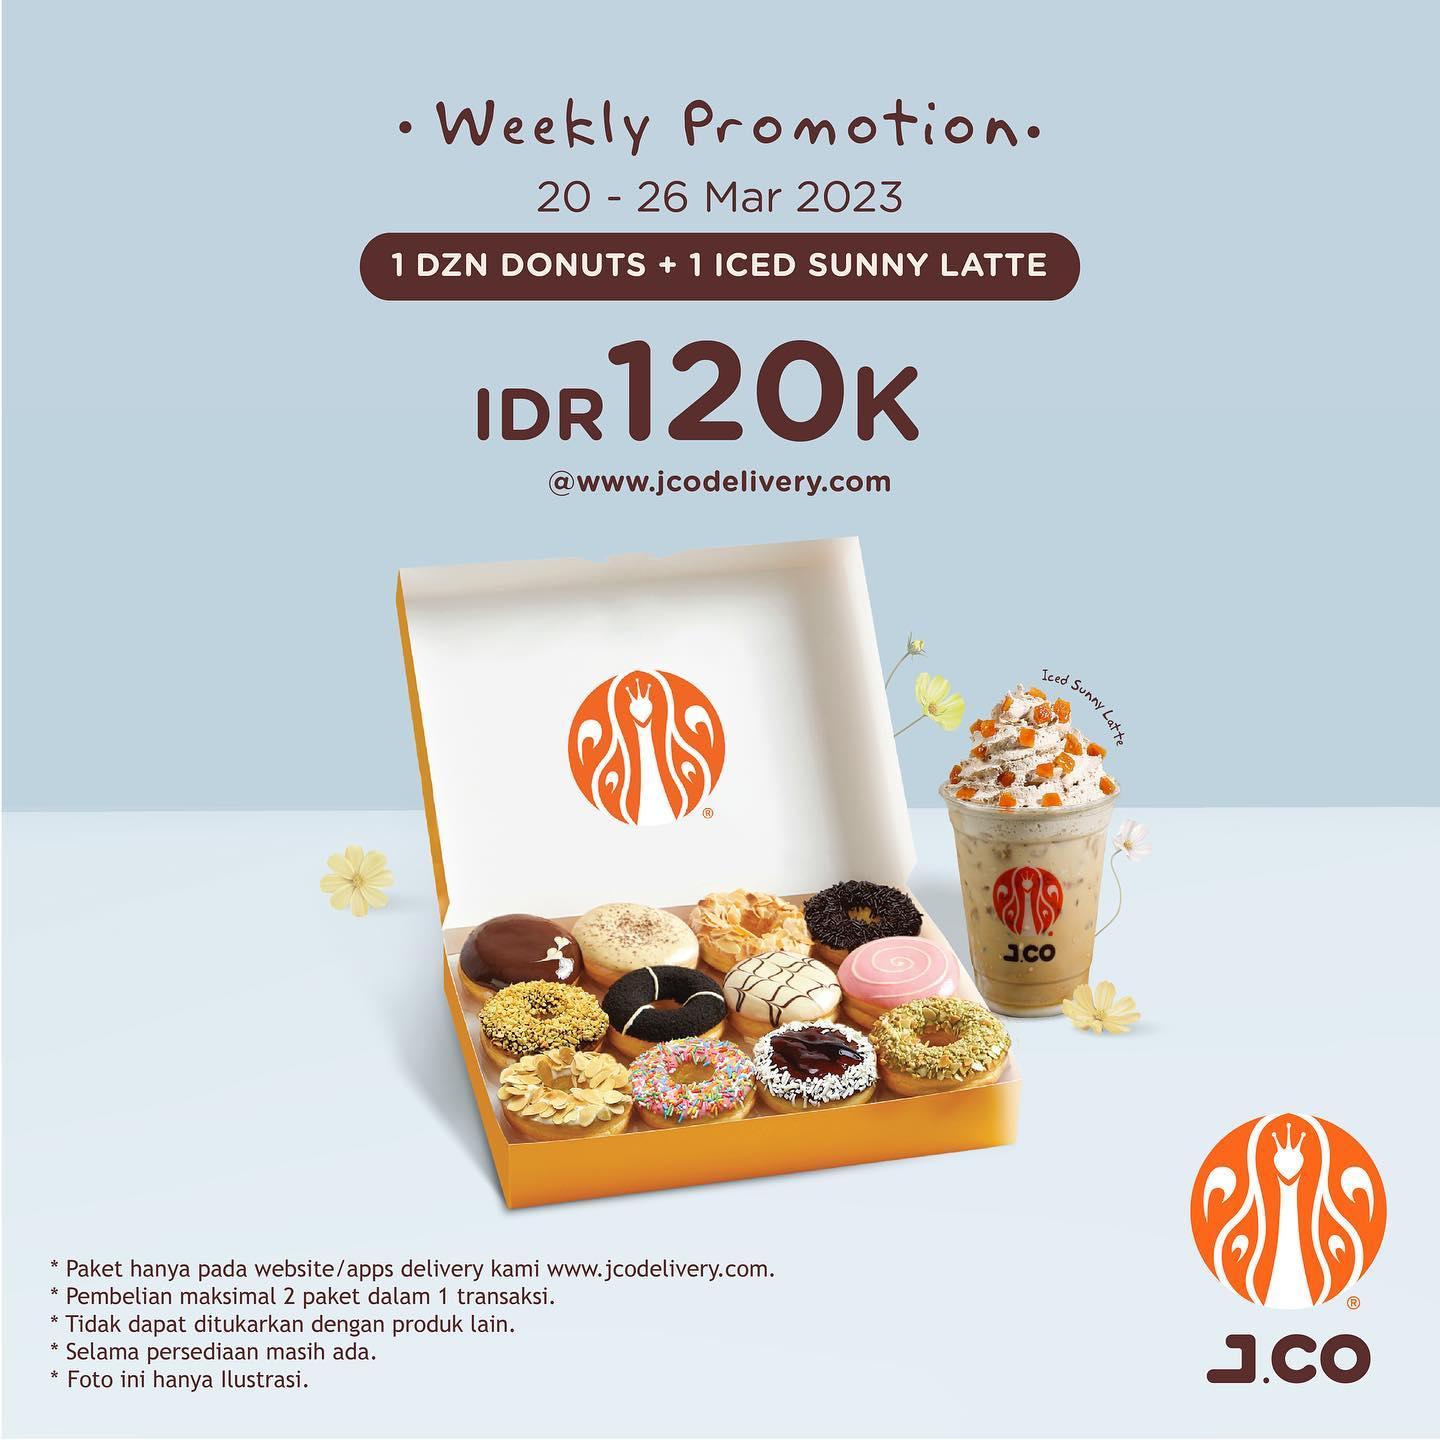 WEEKLY PROMOTION